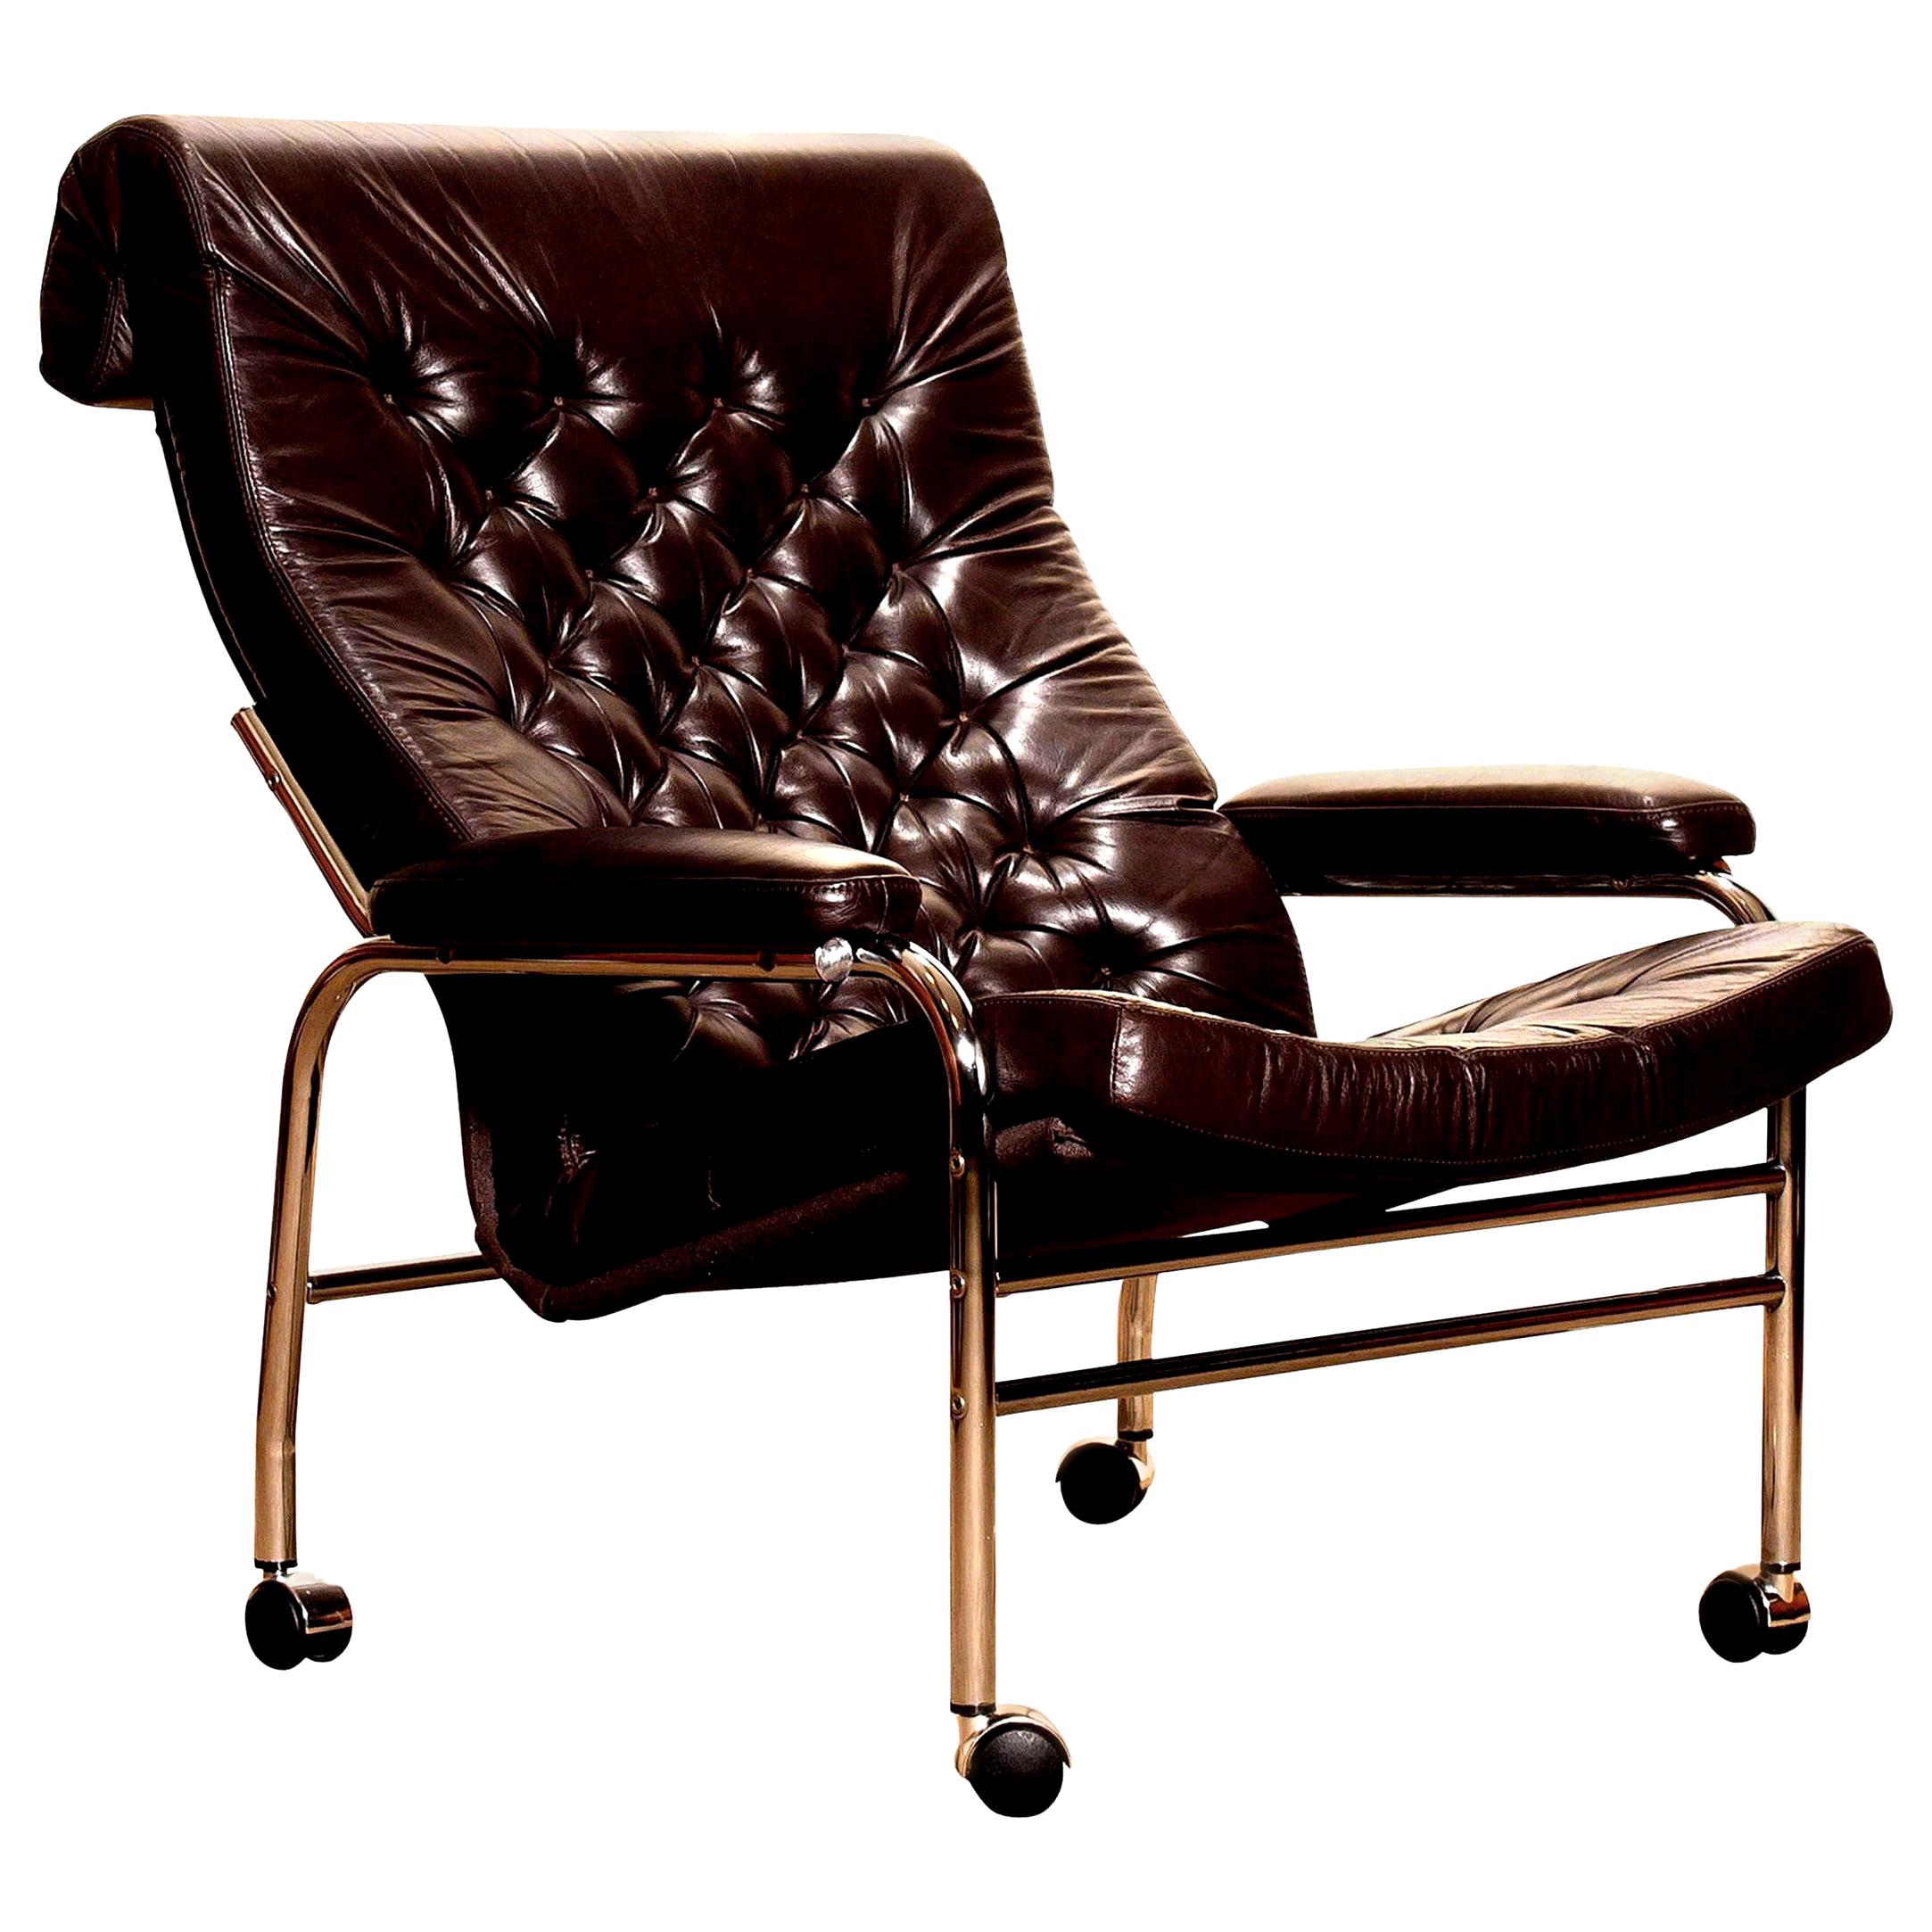 Beautiful and rare lounge chair designed by Noboru Nakamura, Sweden.
This chair has a dark brown leather seating on a chromed tubular wheeled frame.
It is in a mint condition,
circa 1970s.
Dimensions: H 90 cm x W 78 cm x D 93 cm x SH 40 cm.